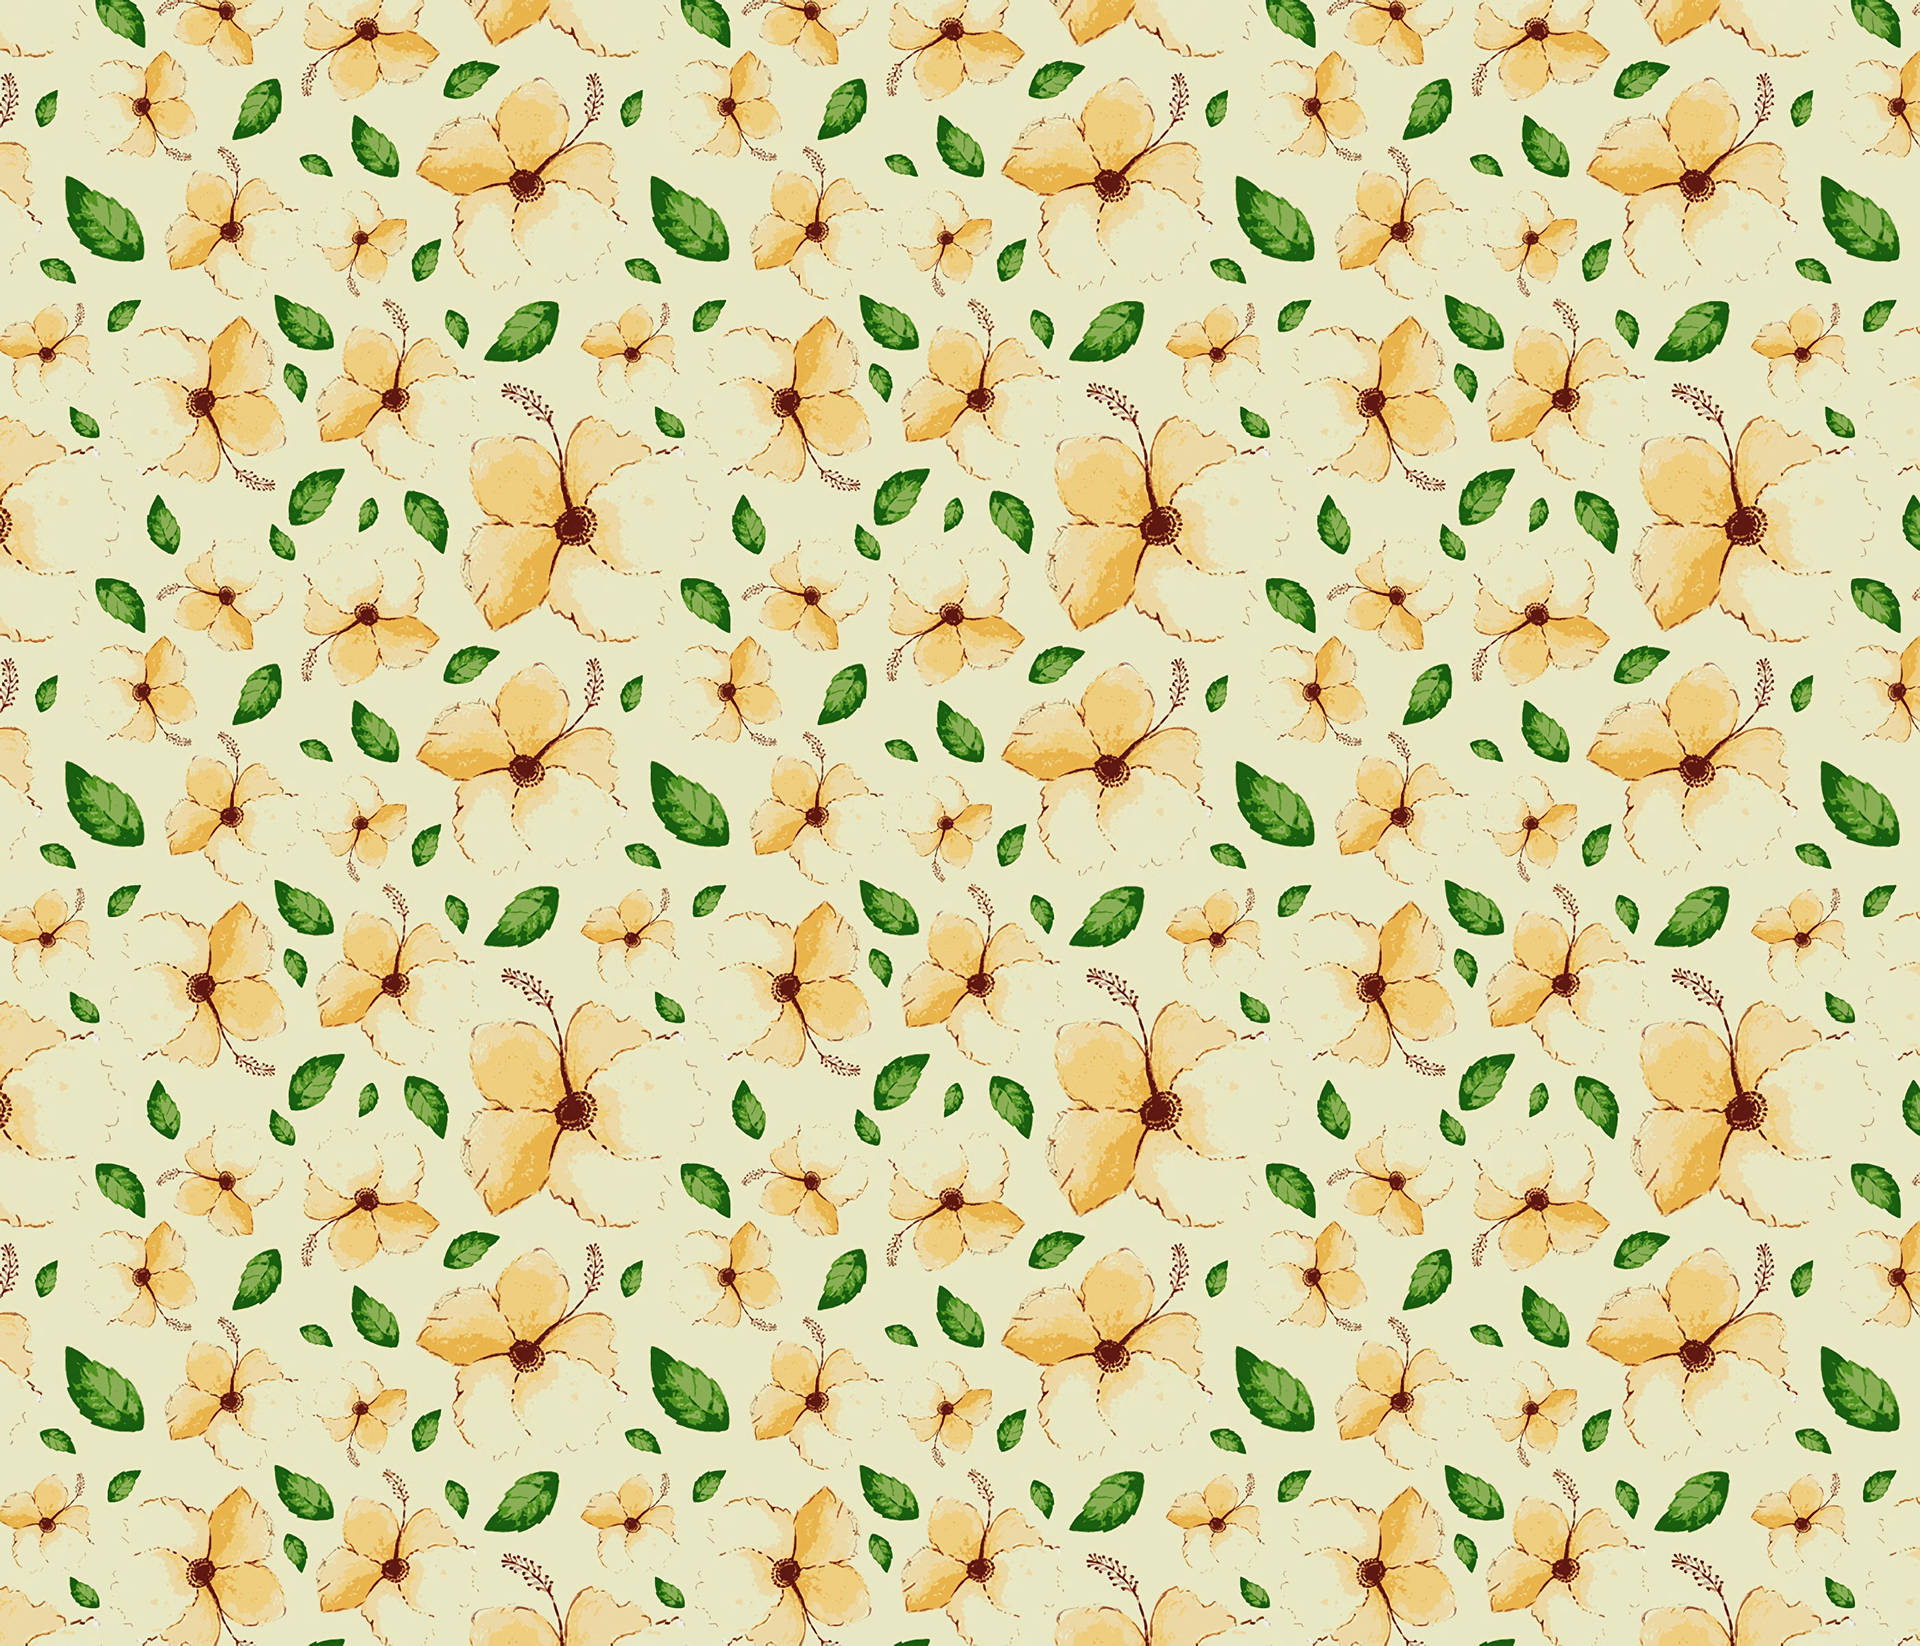 Floral 2800X2400 Wallpaper and Background Image